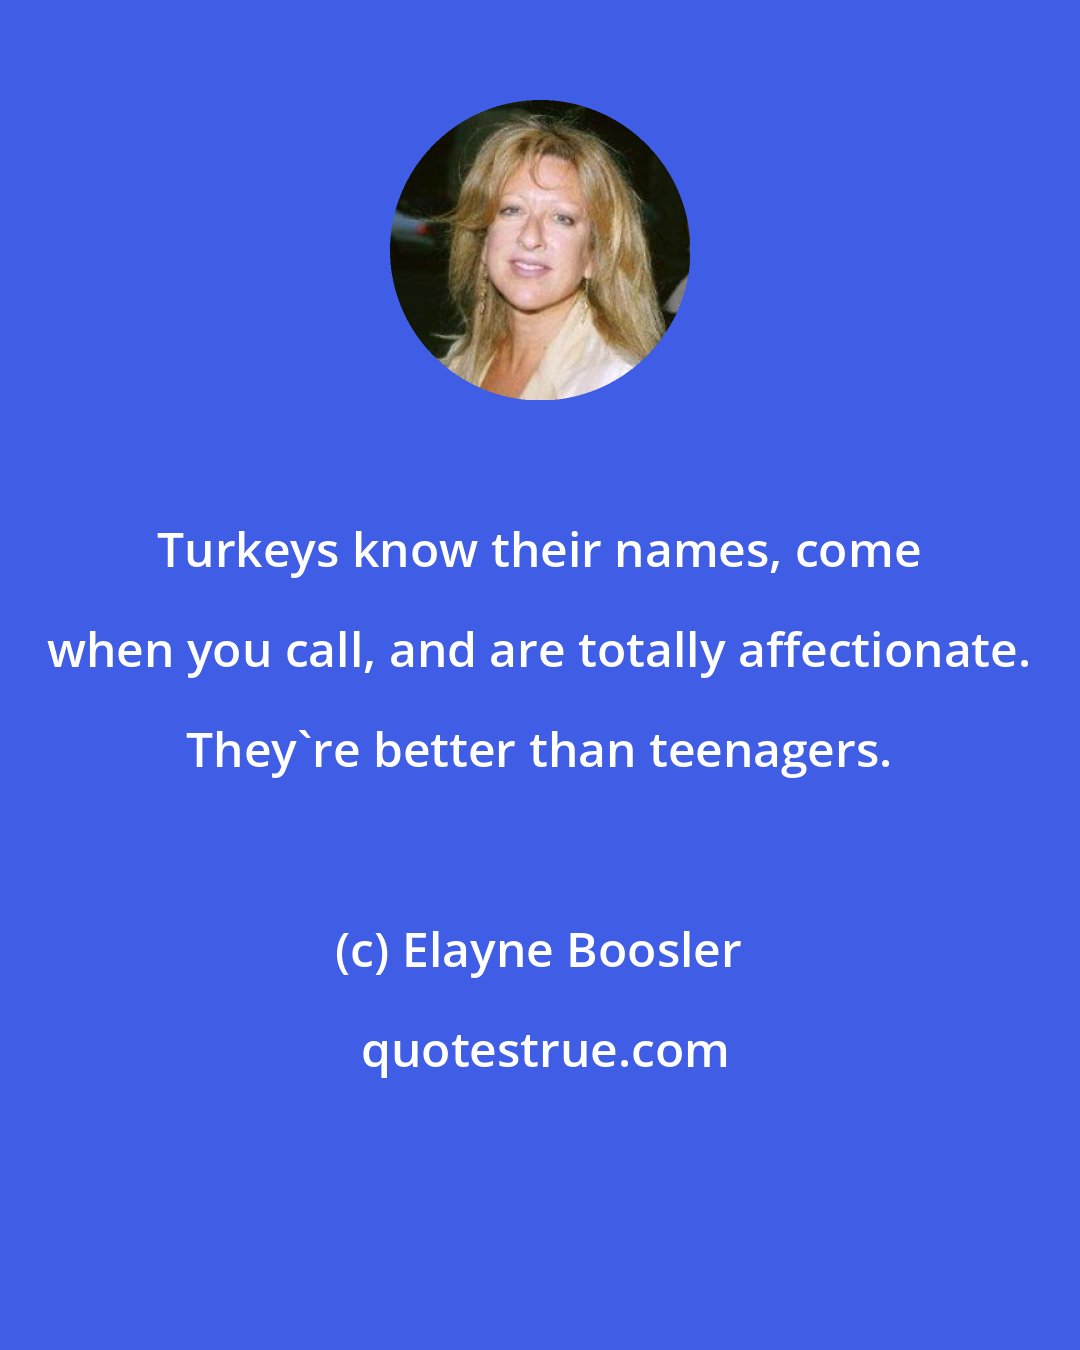 Elayne Boosler: Turkeys know their names, come when you call, and are totally affectionate. They're better than teenagers.